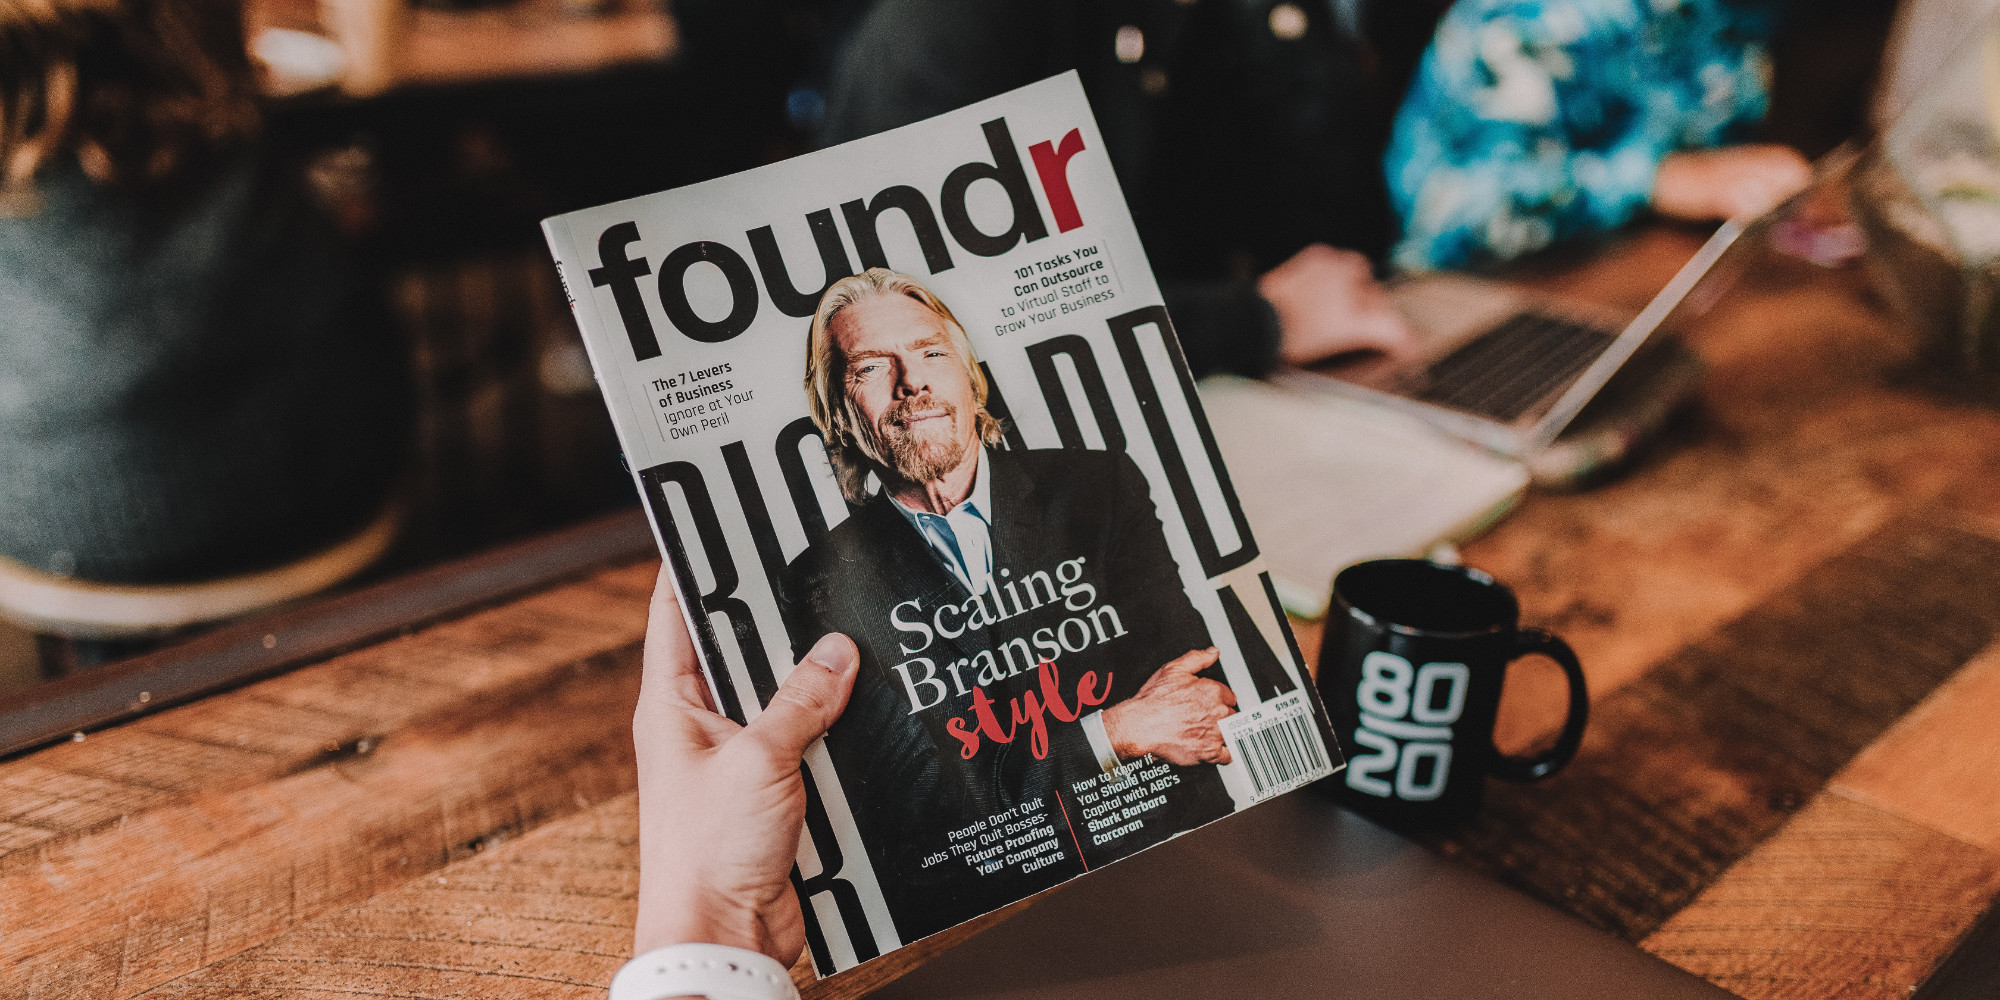 What makes a good Founder?